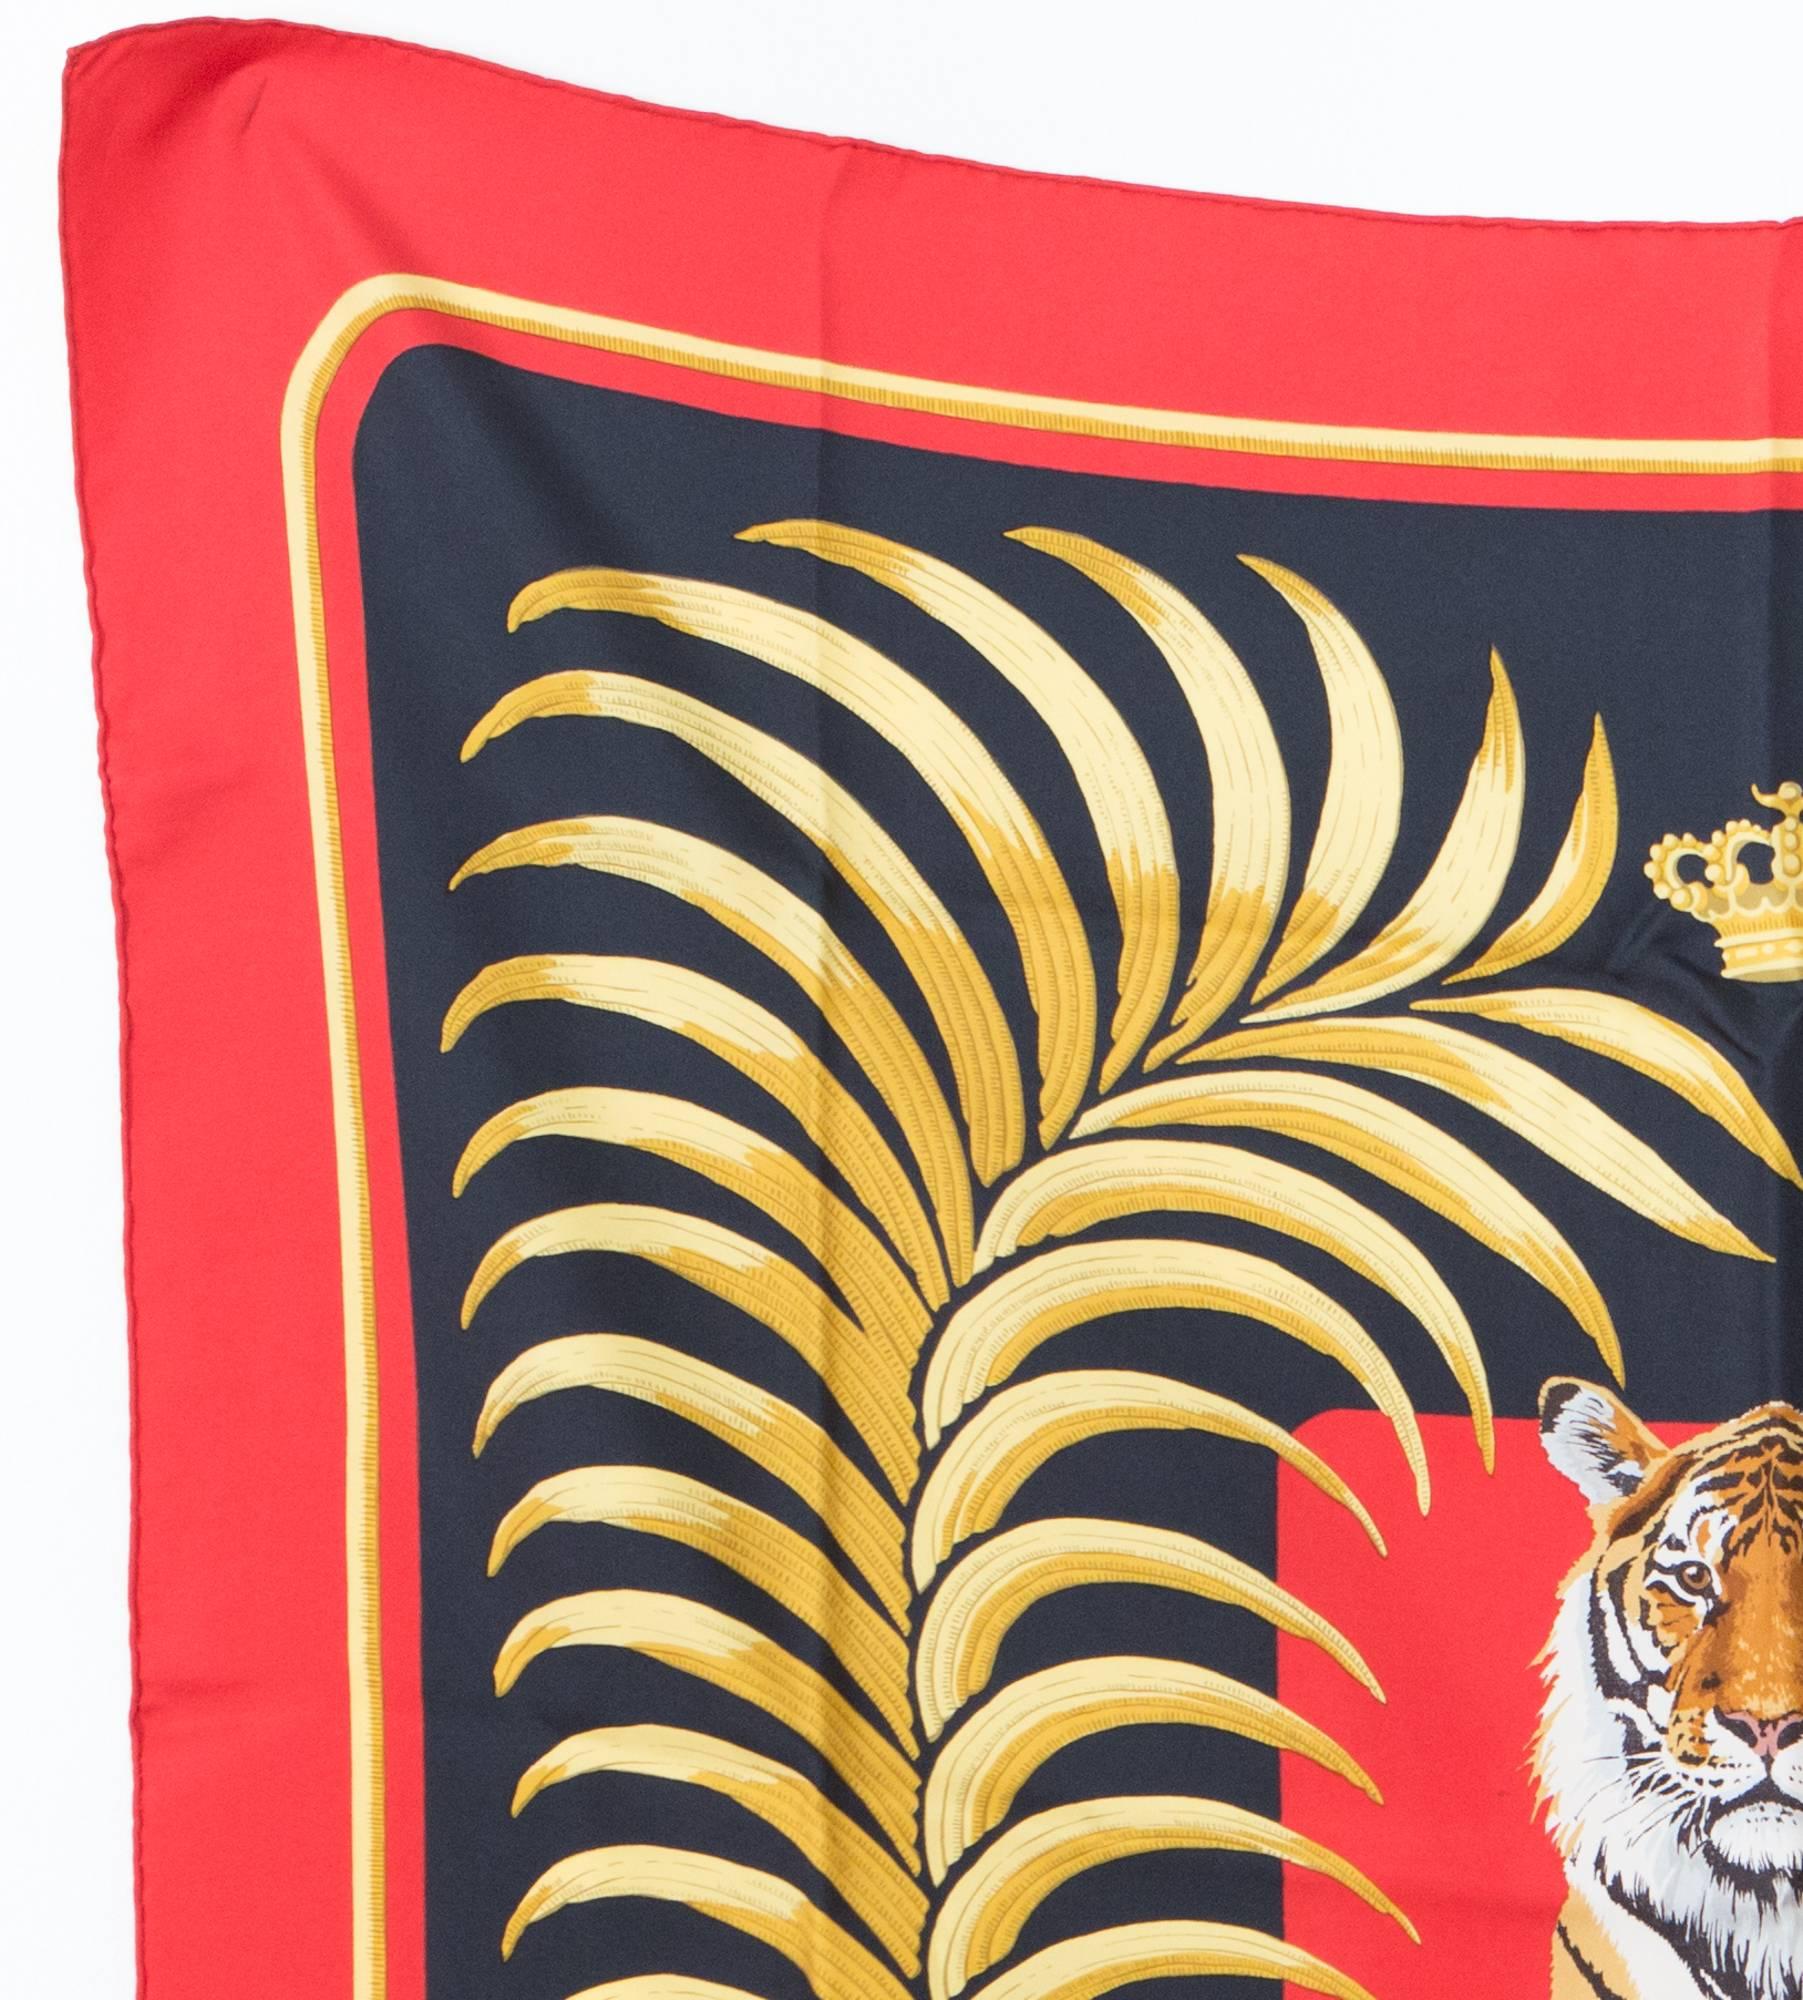 Originally issued in 1977, Hermes Tigre Royal by Christiane Vauzelles has become an iconic, highly coveted Hermes print. The 'Tigre Royal' features a regal tiger at the center surrounded by a golden wreath on a black background. Marked Hermes Paris.